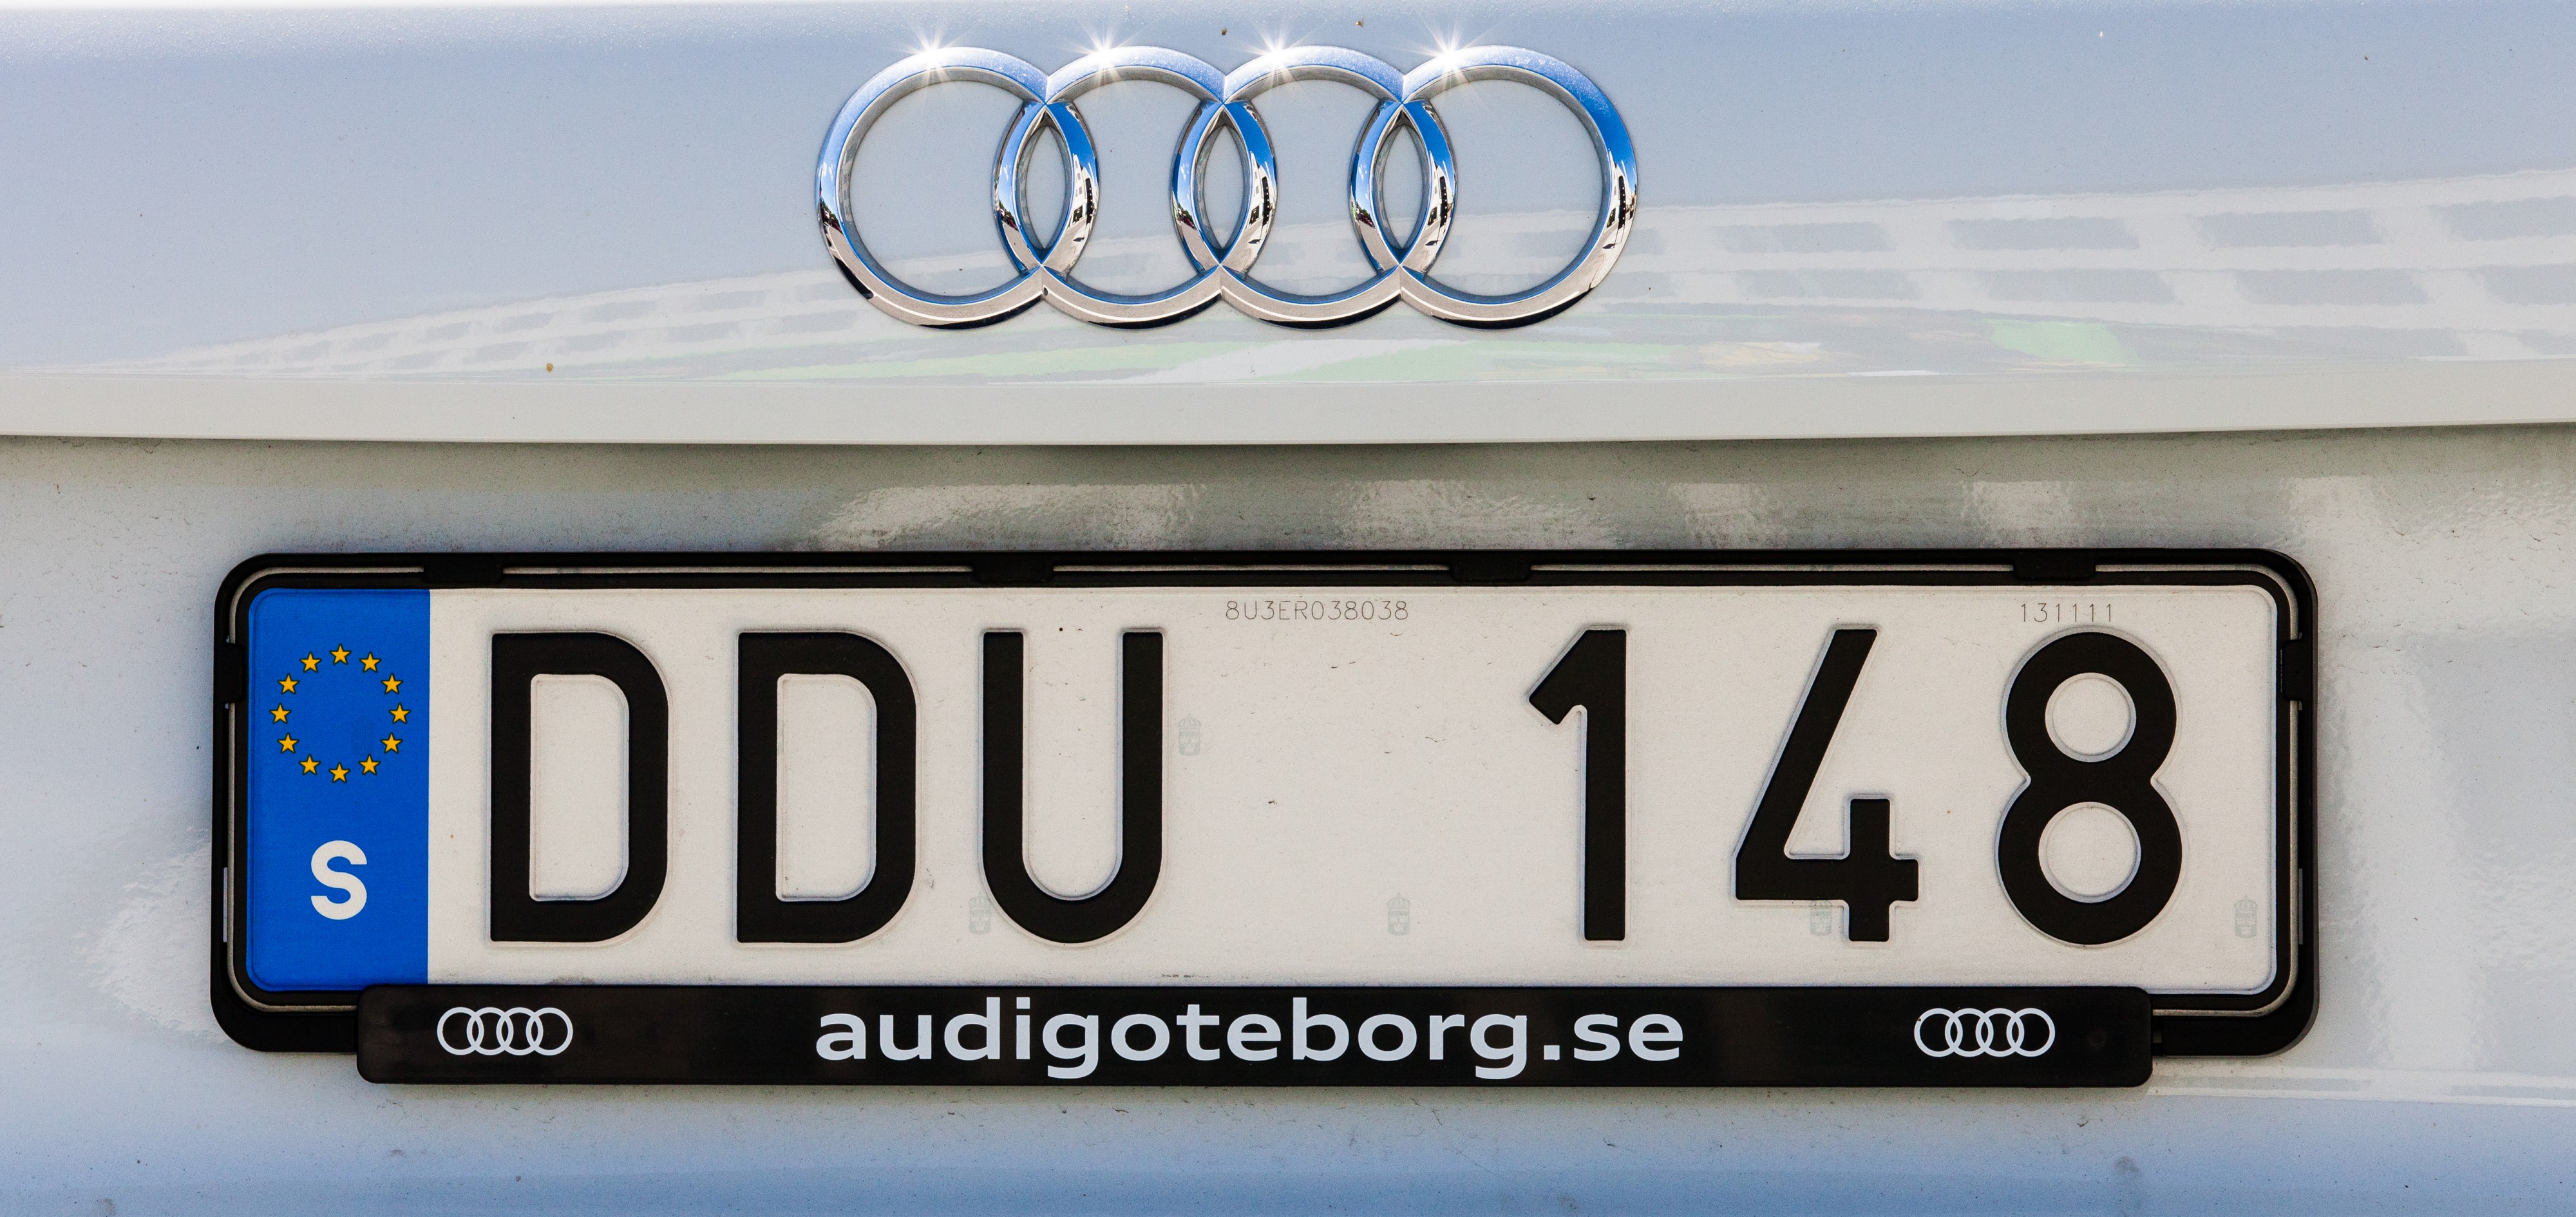 an Audi car number plate in Gothenburg, Sweden, June 2014, picture 13